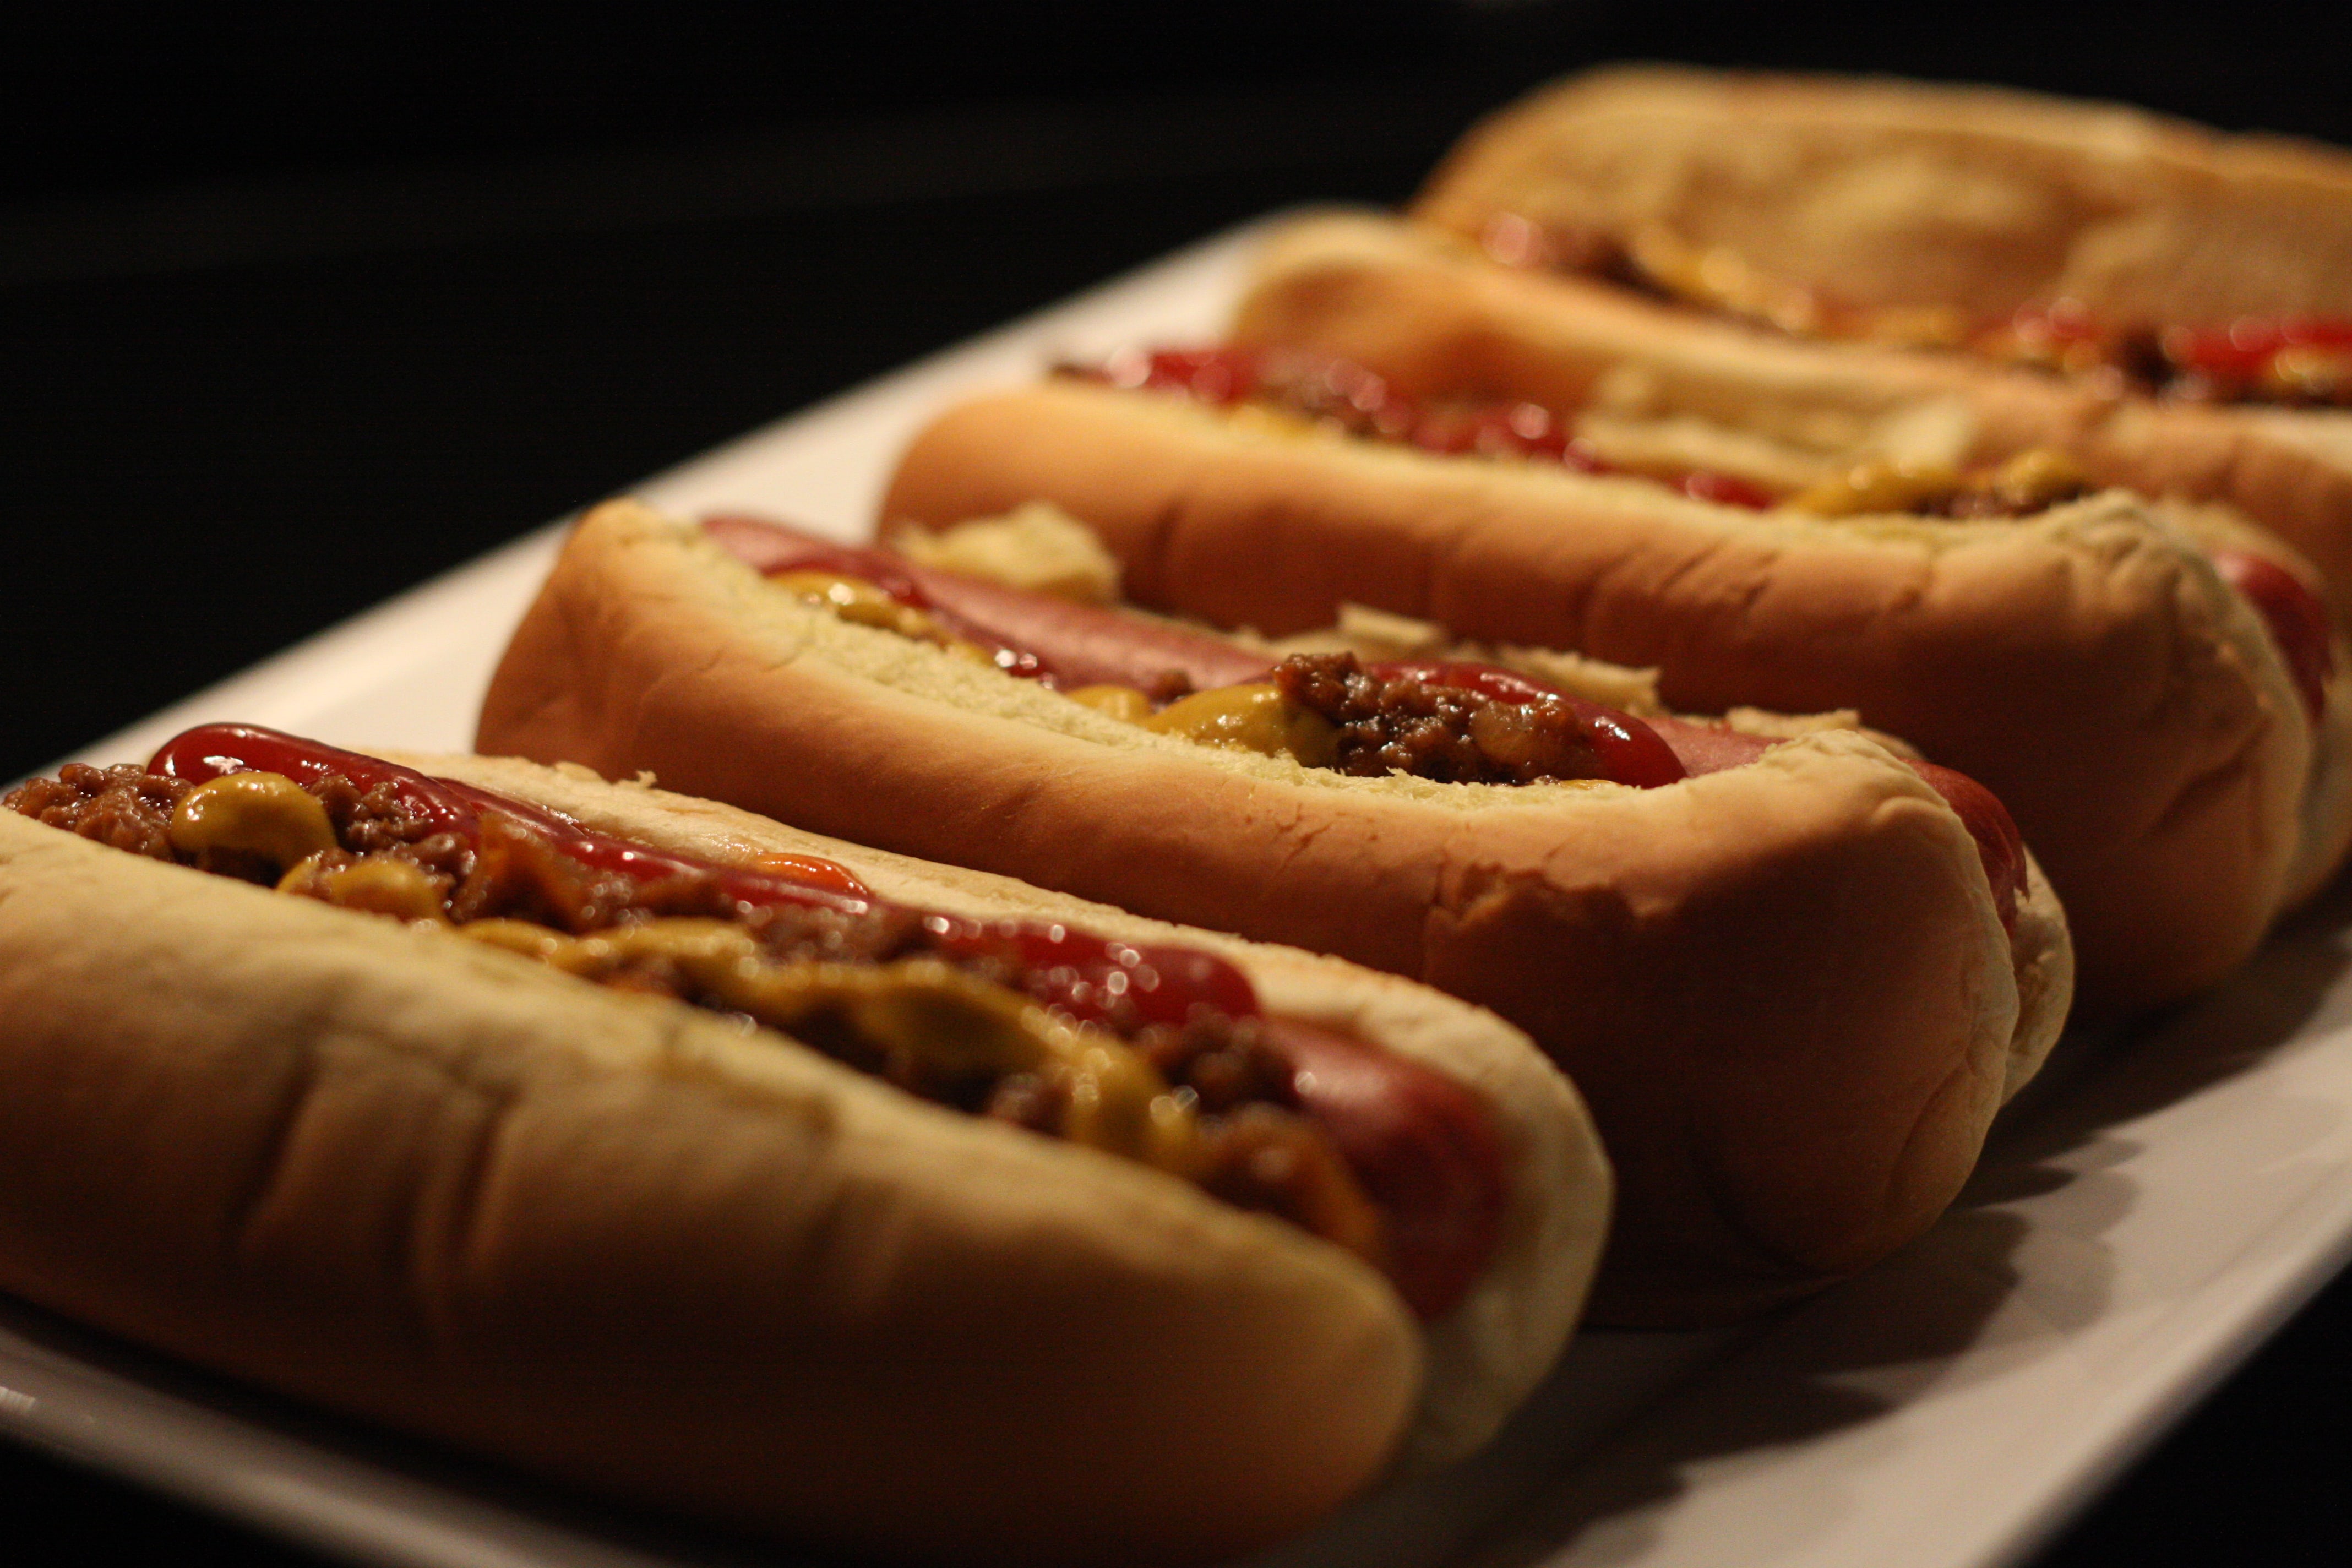 Hot Dog Hd Wallpapers 7wallpapers Net Images, Photos, Reviews